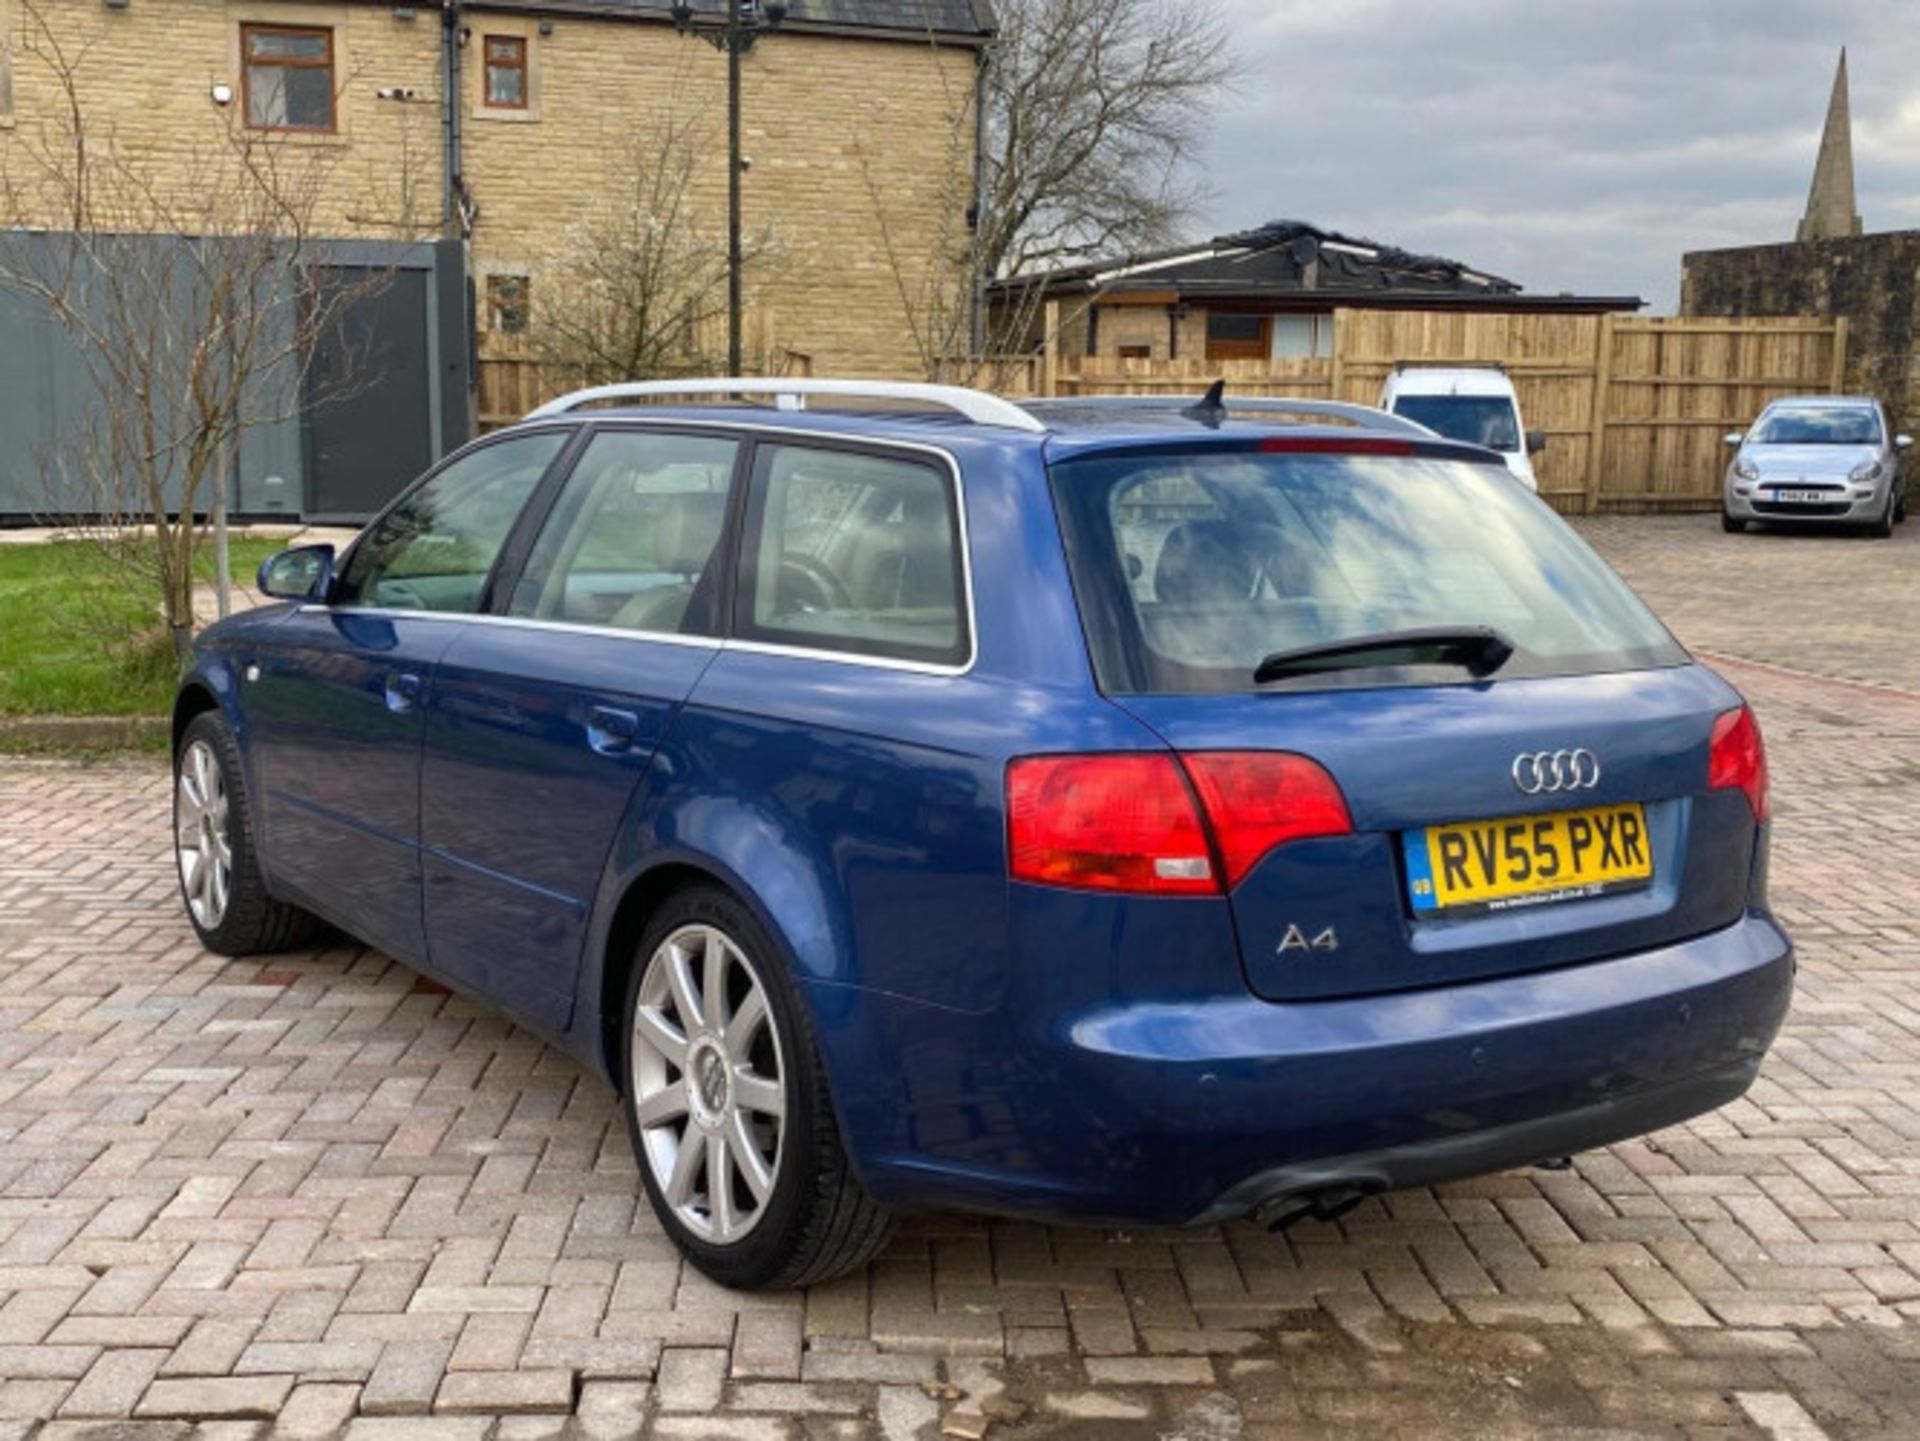 AUDI A4 AVANT 1.9 TDI SE 5DR ESTATE - RARE AND RELIABLE LUXURY WAGON >>--NO VAT ON HAMMER--<< - Image 59 of 63